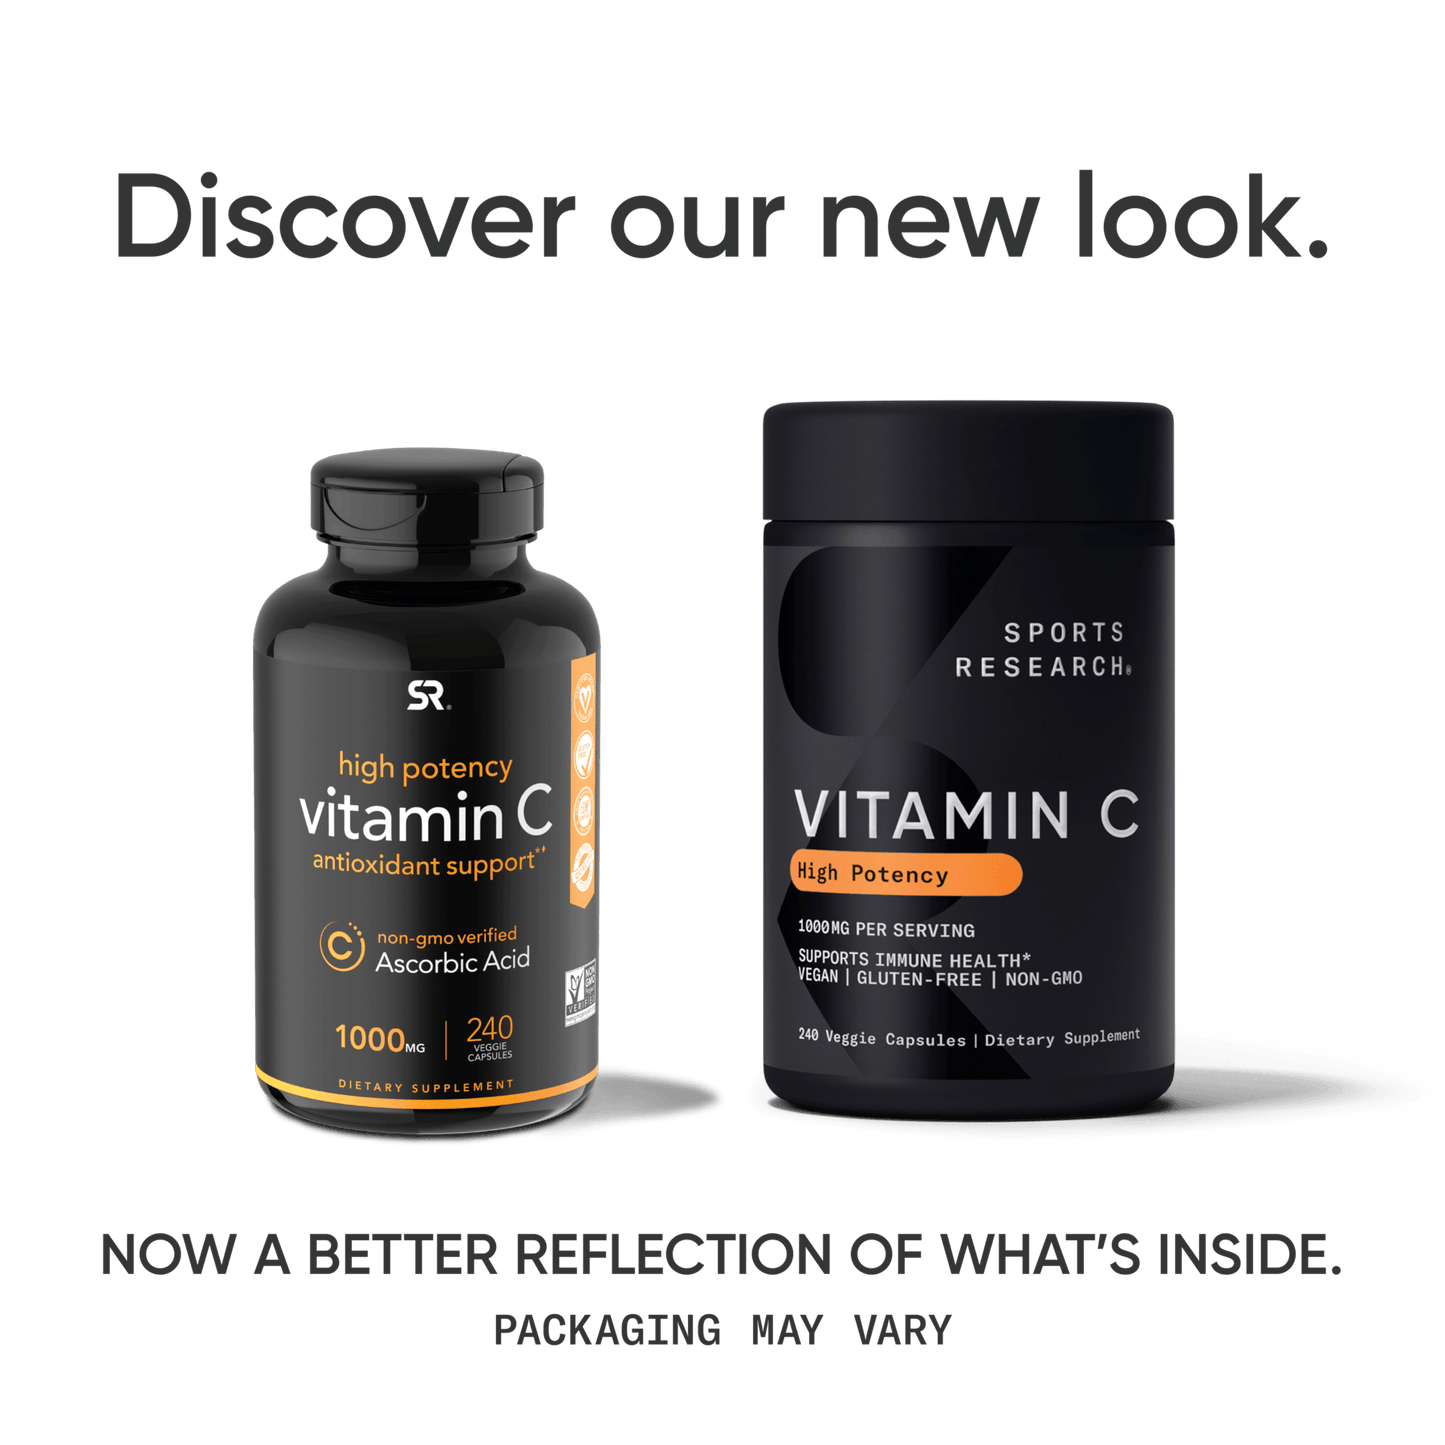 High Potency Vitamin C - now better reflection of what's inside.